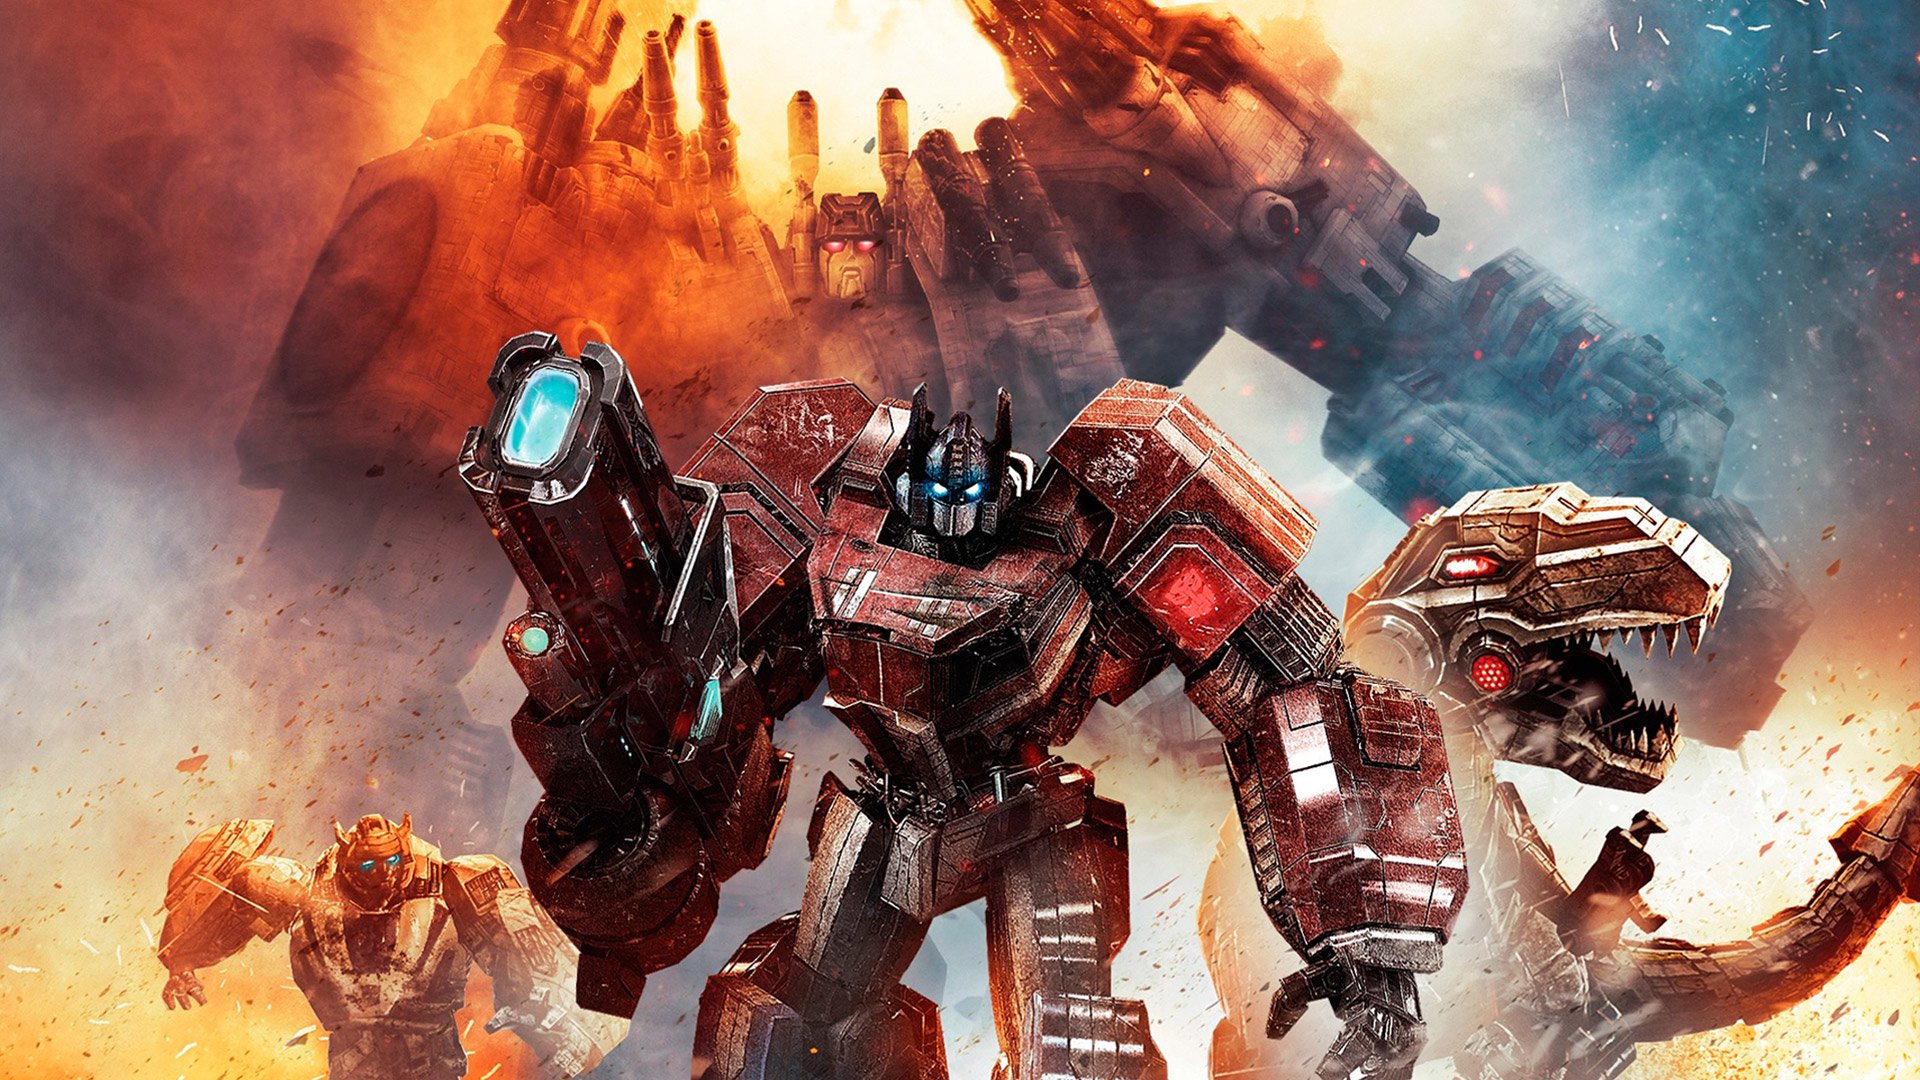 TRANSFORMERS: Fall of Cybertron